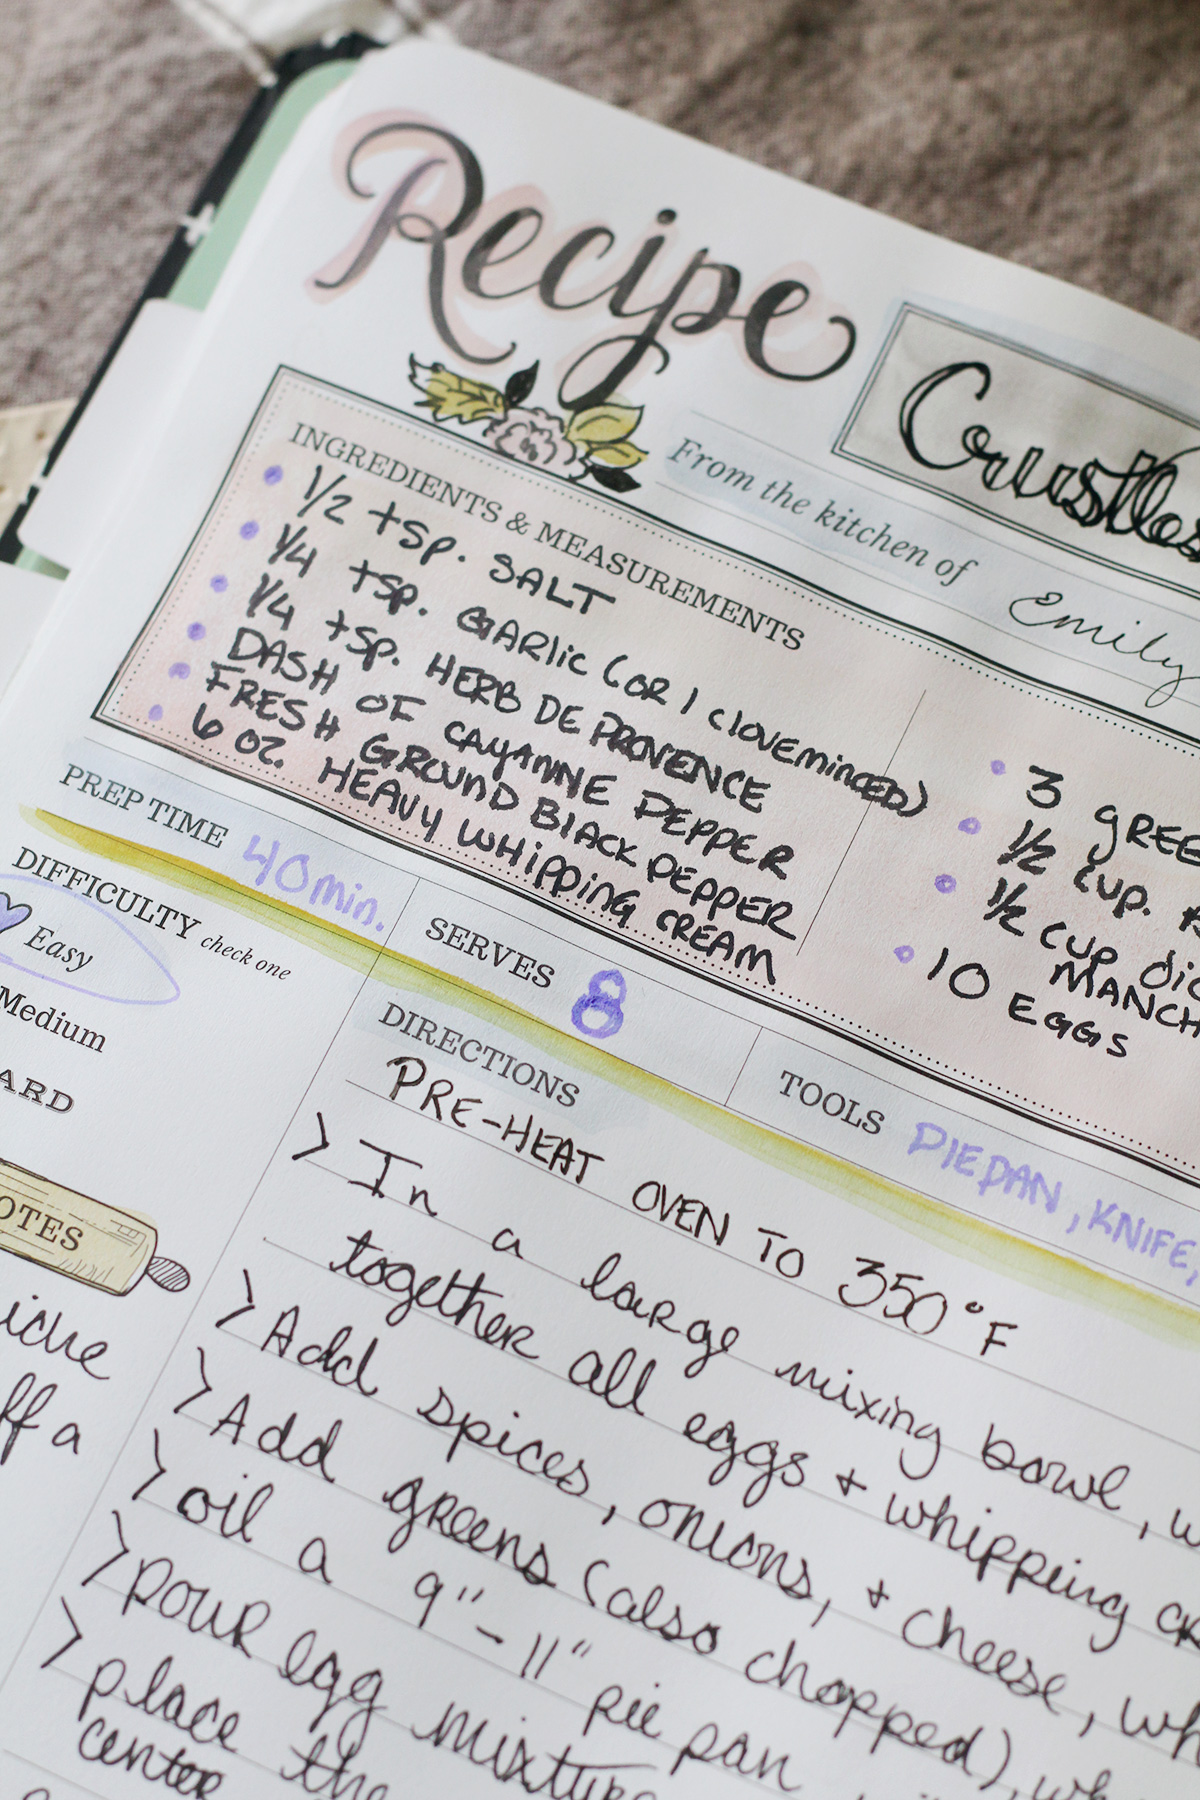 Crustless Quiche Recipe Crafted & Hand-Written in The Keepsake Kitchen Diary - a Family Cookbook & Memory Keeper